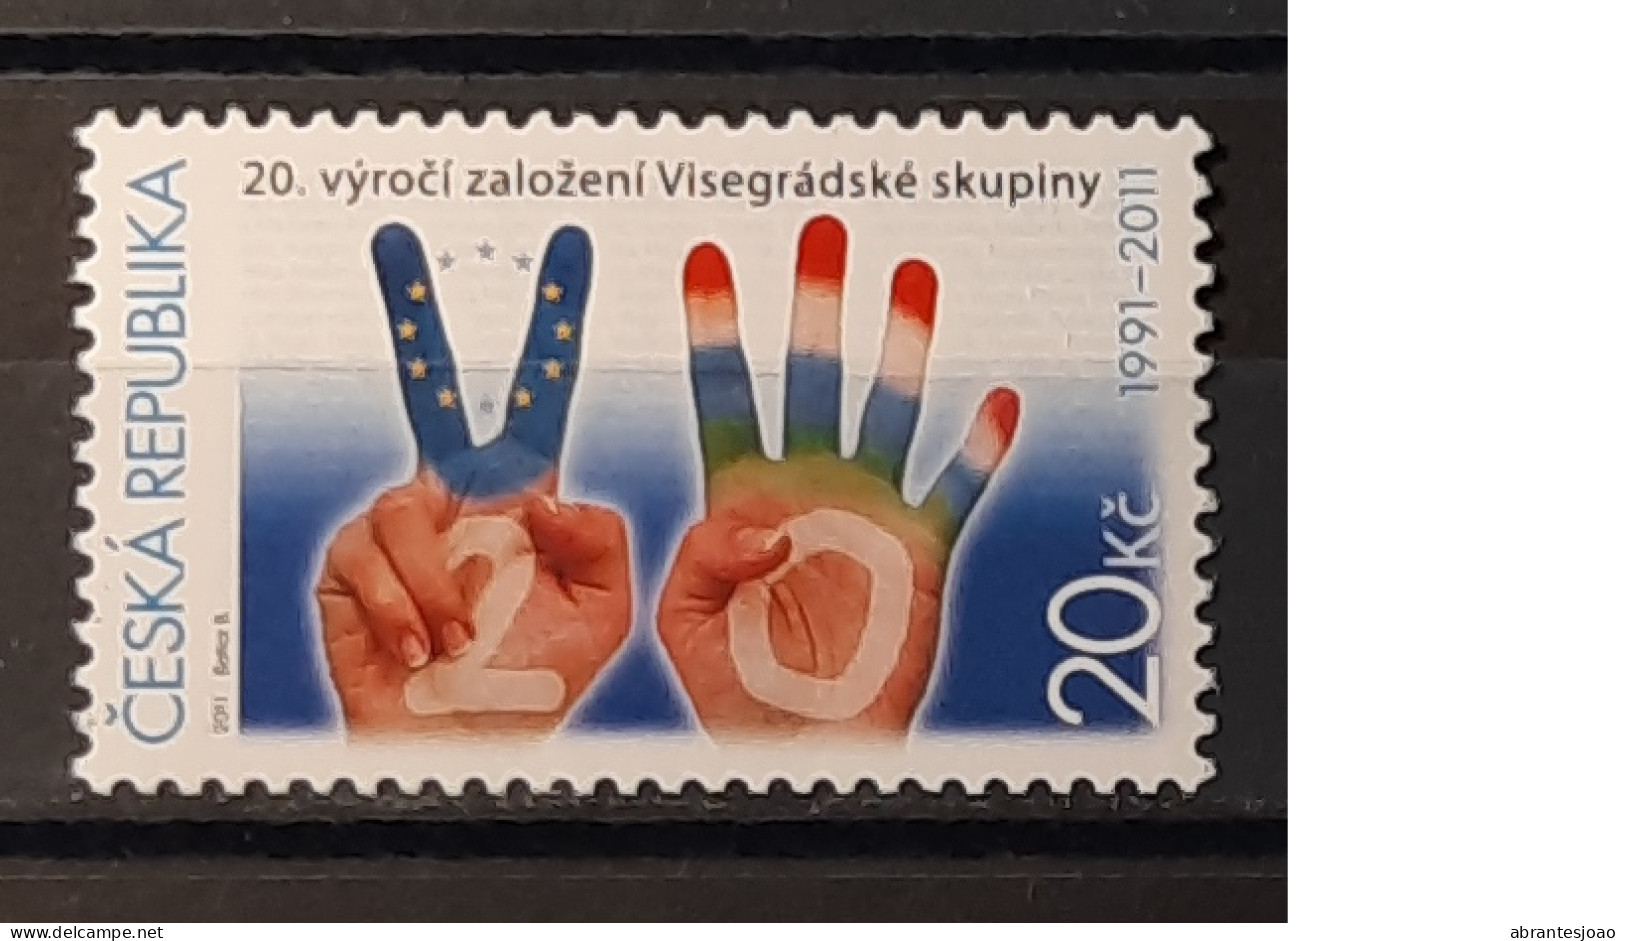 2011 - Slovakia - MNH - 20th Anniversary Of Visegrad Group - 1 Stamp - Used Stamps